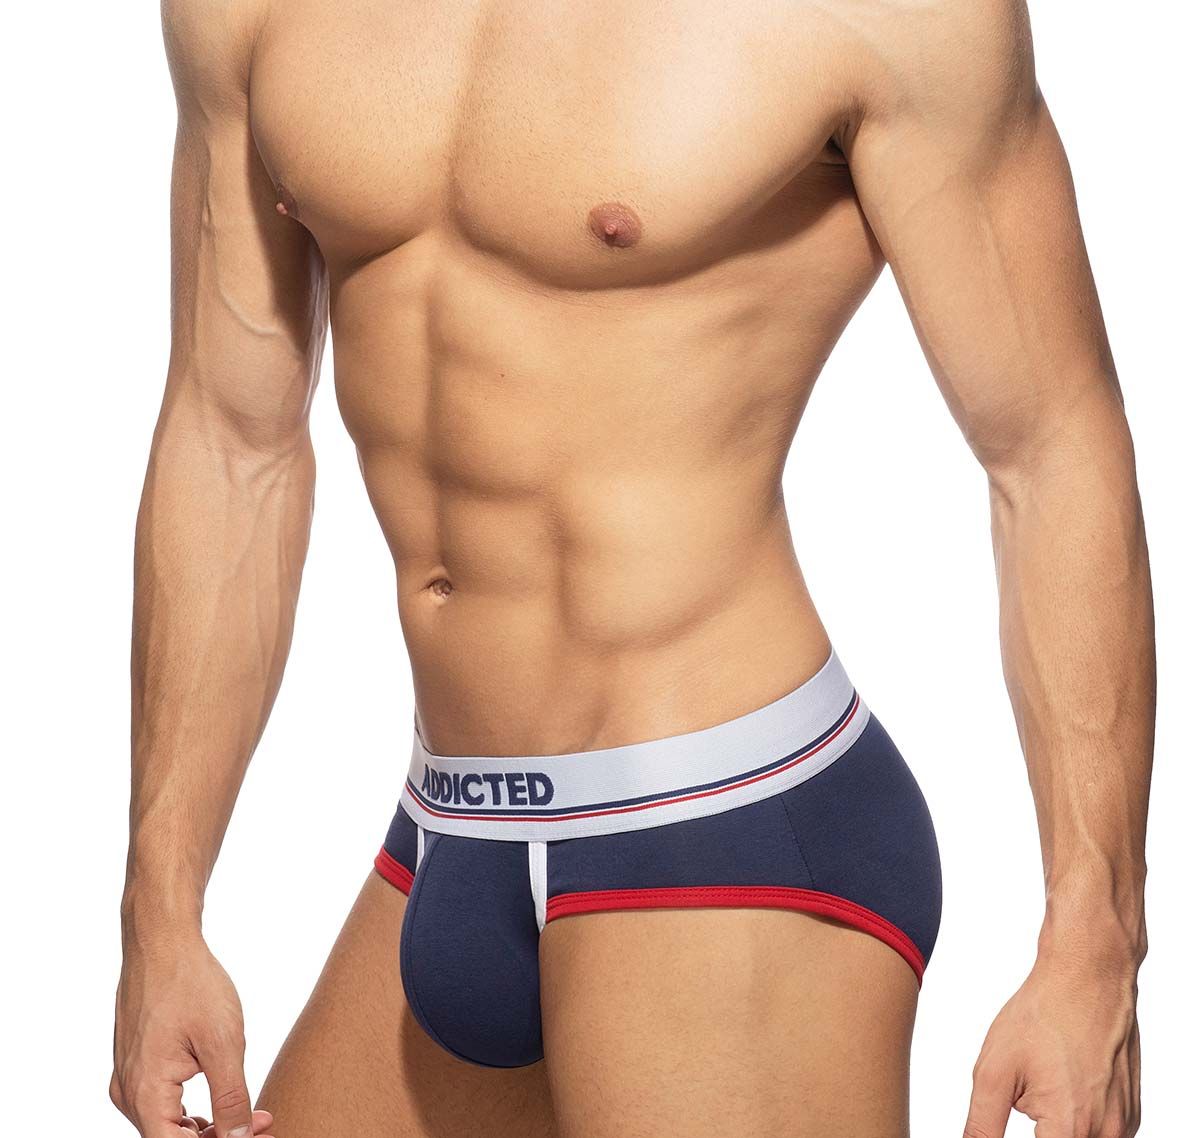 Addicted Pack de 3 Slips TOMMY 3 PACK BRIEF AD1008P, blanco/rojo/azul marino